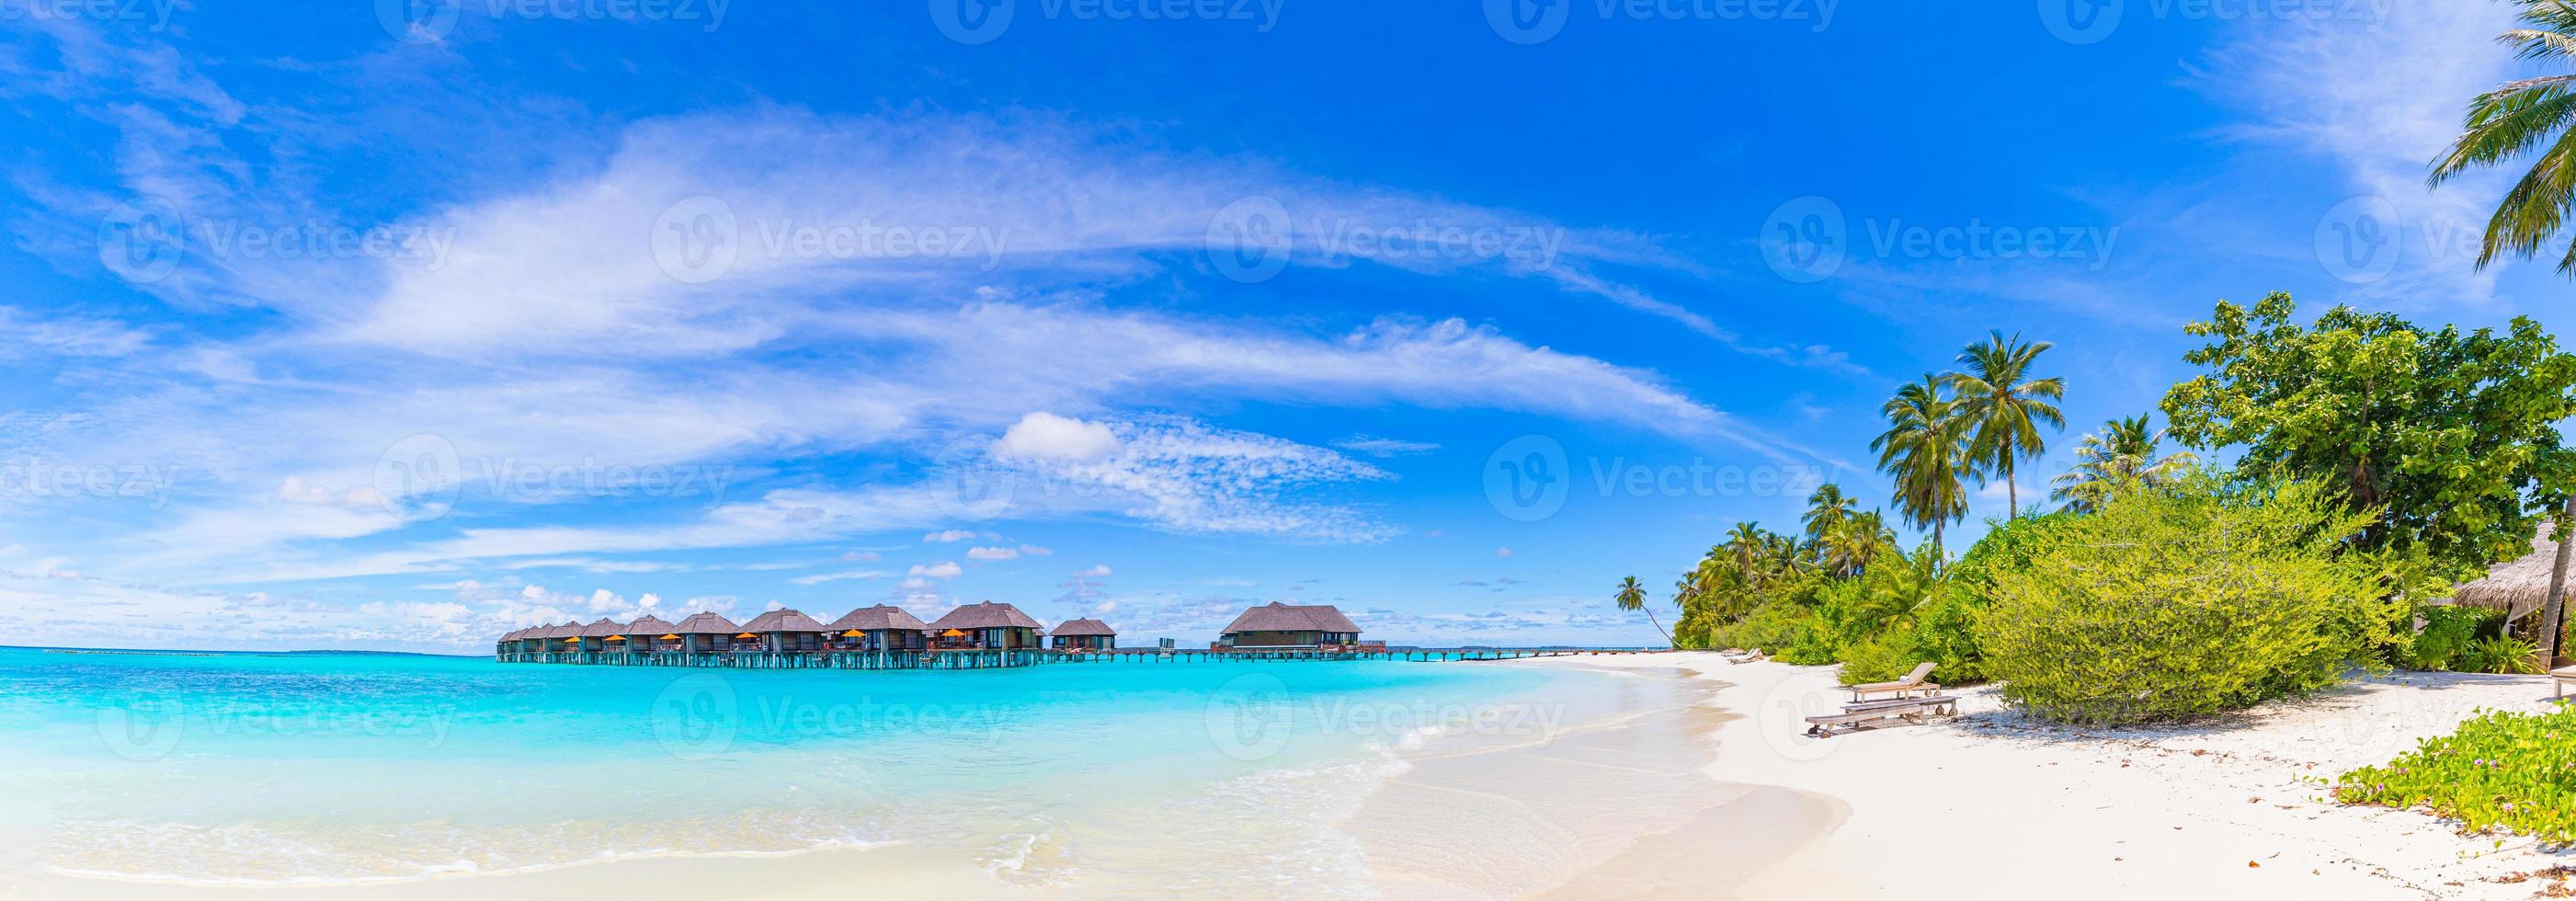 Amazing panorama at Maldives. Luxury resort villas seascape with palm trees, white sand and blue sky. Beautiful summer landscape. Amazing beach background for vacation holiday. Paradise island concept photo